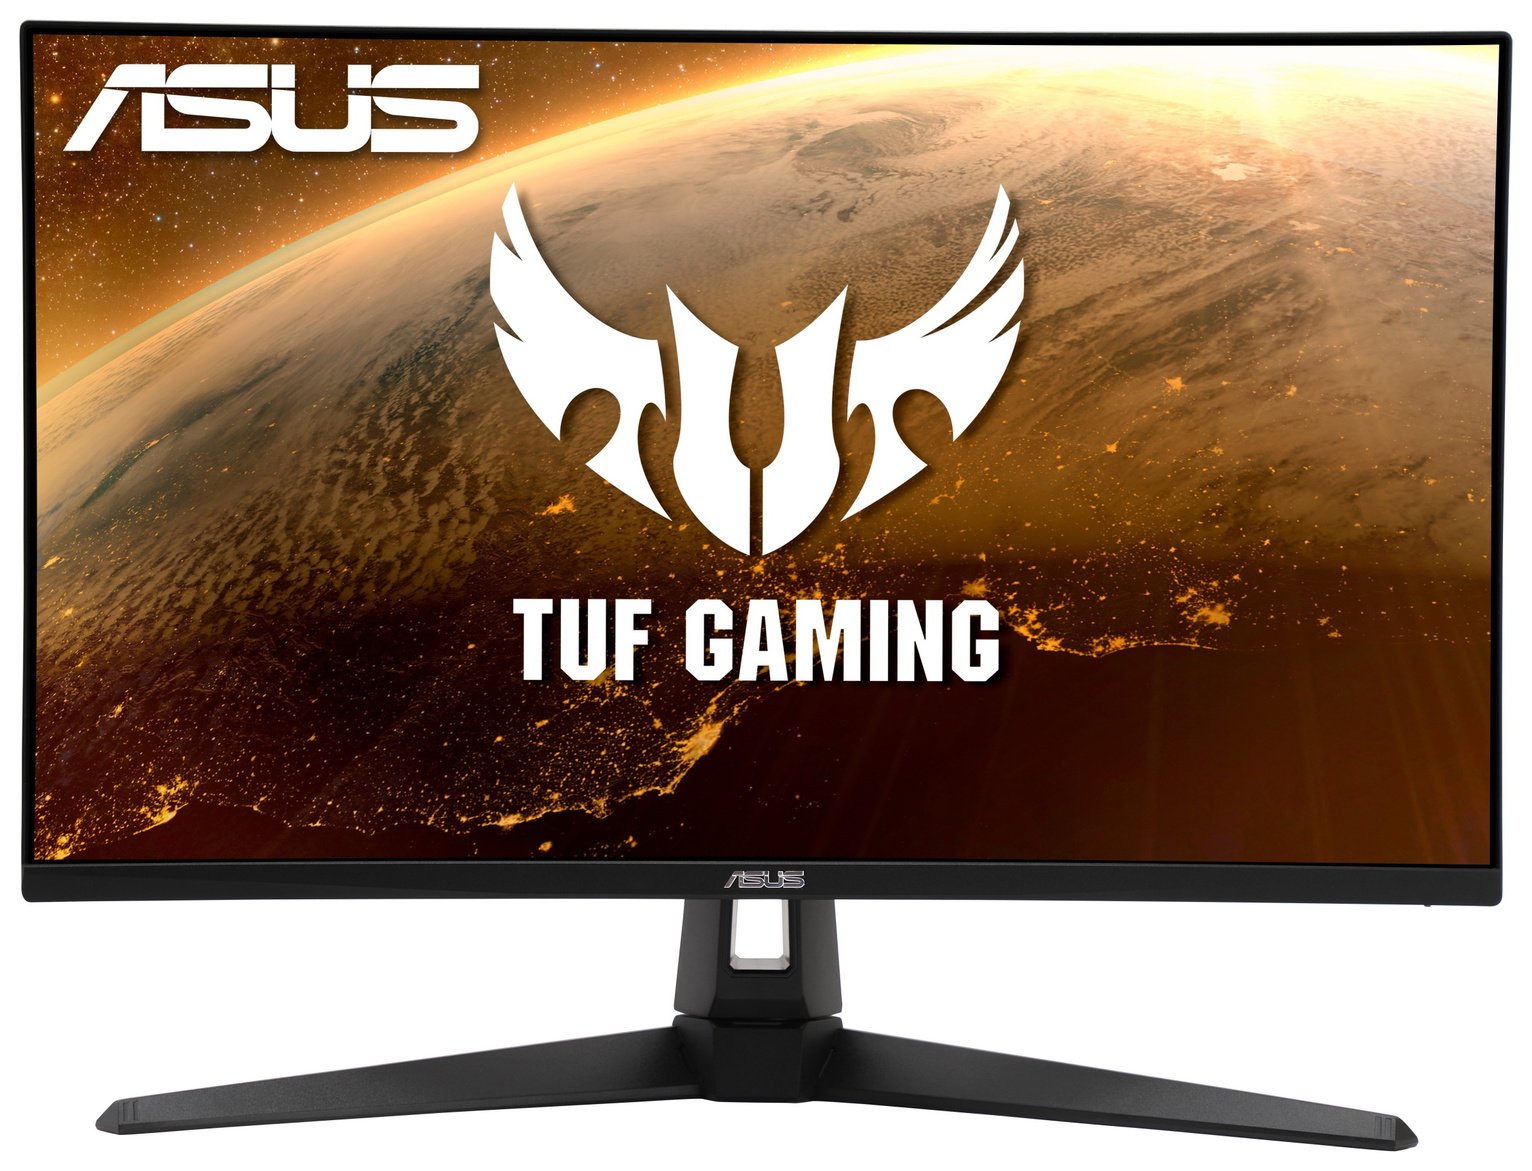 ASUS TUF VG279Q1A 27 Inch 165Hz IPS FHD Gaming Monitor